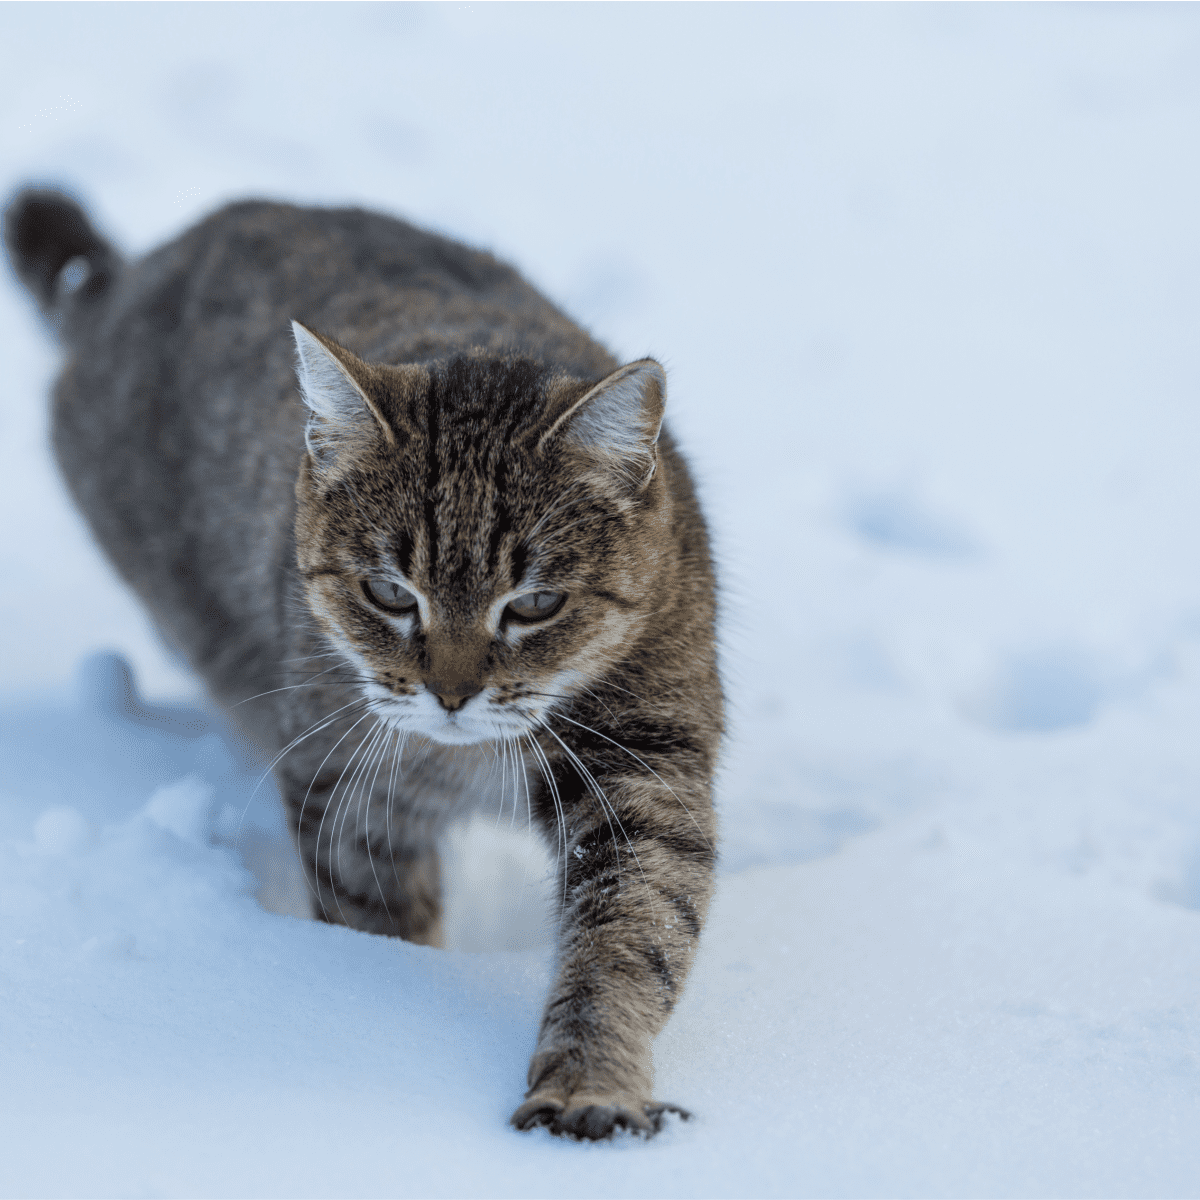 Our winter cat in a puffer jacket is - The Picture Gallery